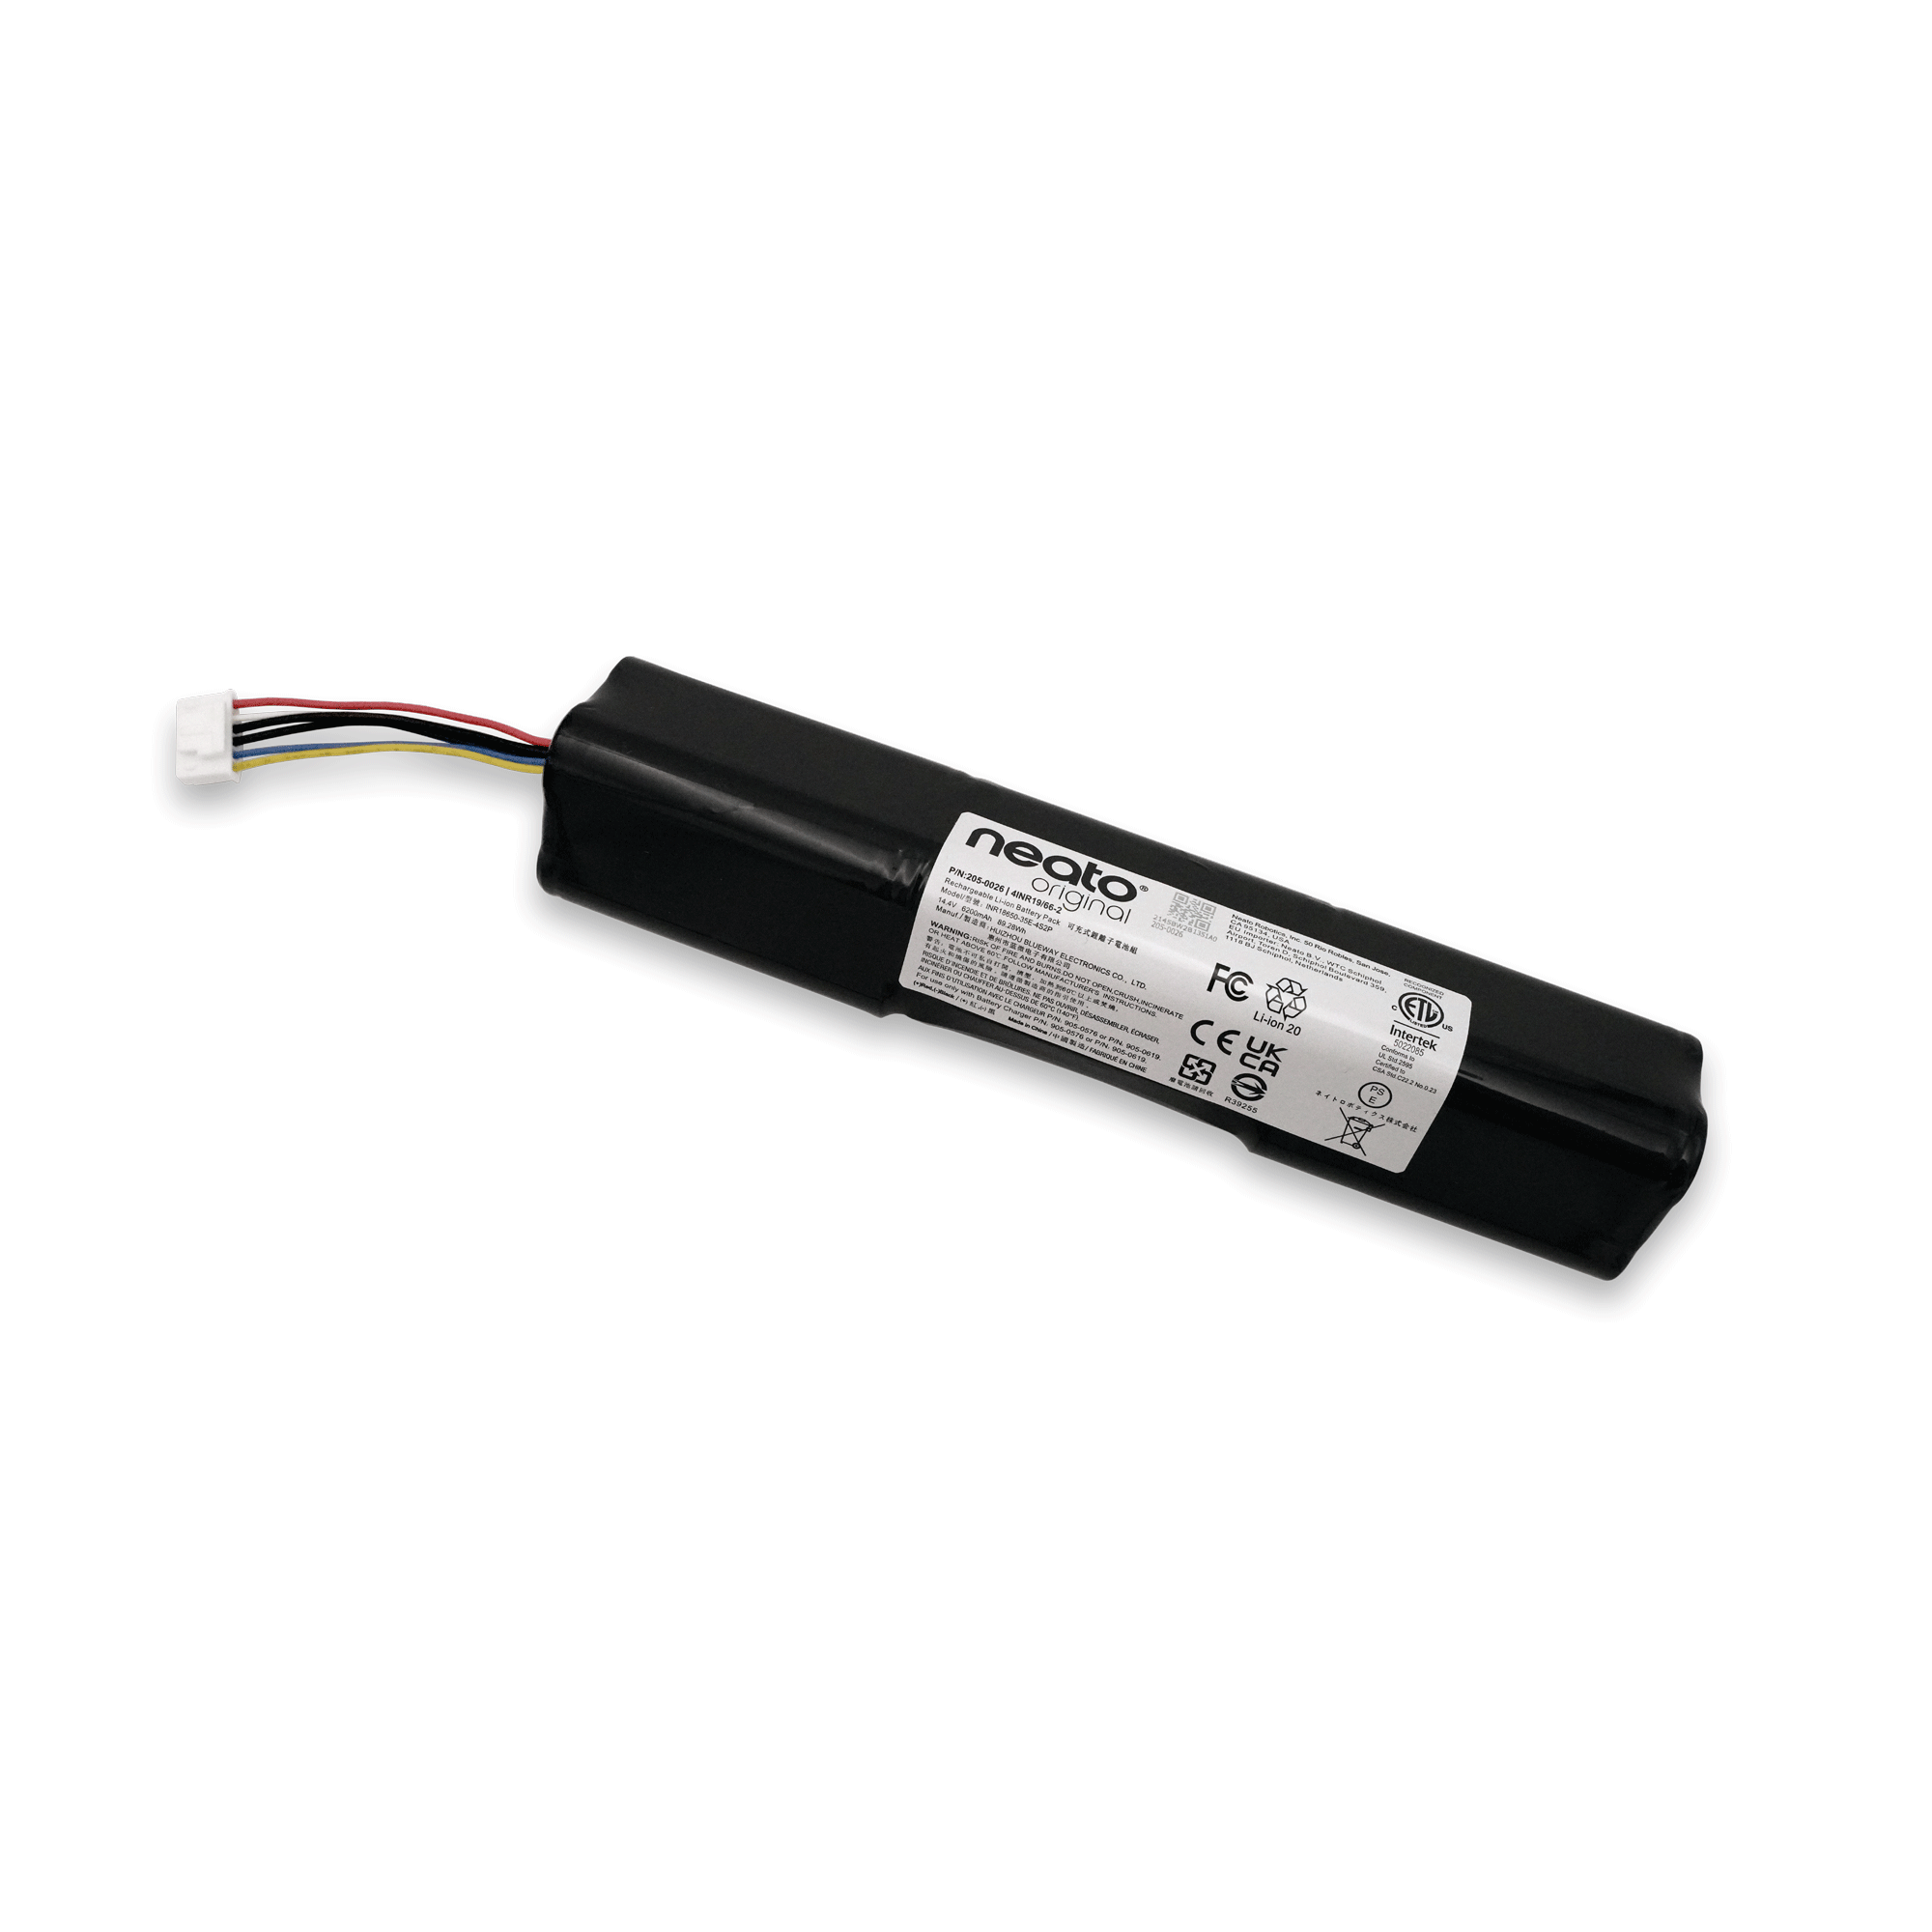 Neato D10 Lithium-Ion Battery